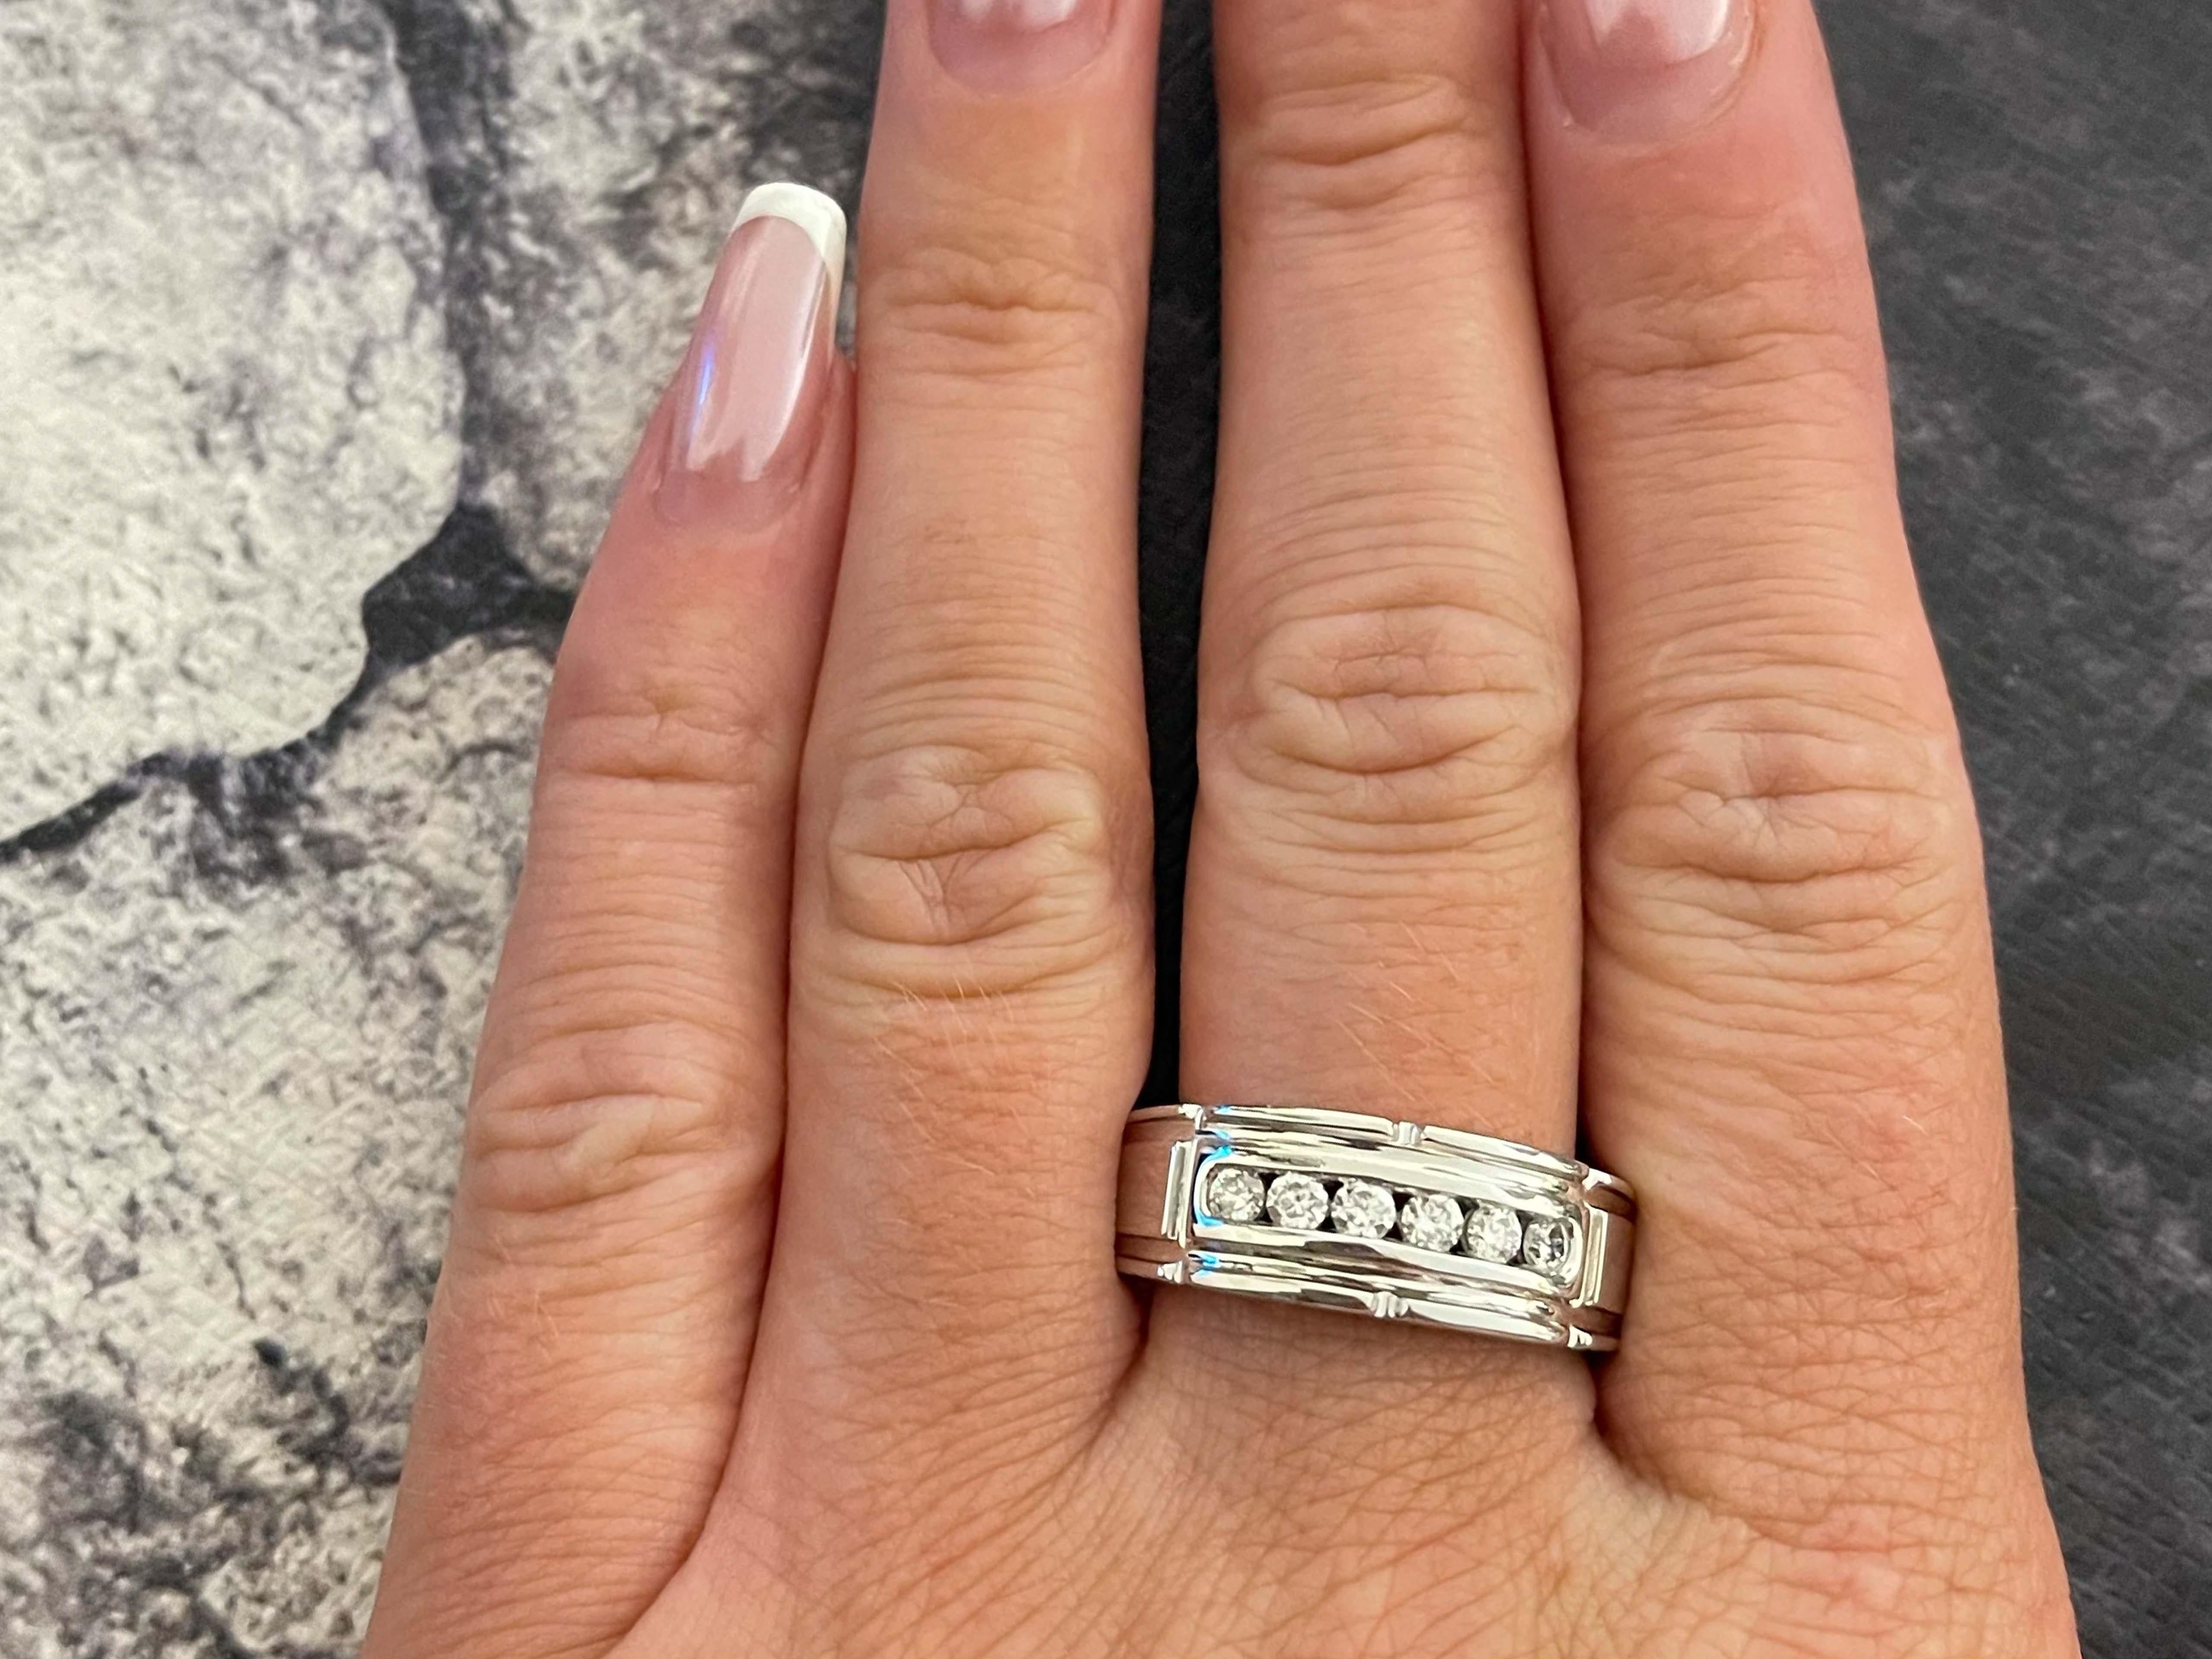 Item Specifications:

Metal: 14k White Gold 
​
​GSI Report #: 27363200121

Diamond Count: 6 brilliant cut

Diamond Carat Weight: ~3/8 carats

Diamond Color: I

Diamond Clarity: SI2

Ring Size: 9.75 (resizable)

Total Weight: 10.8 grams

Stamped: